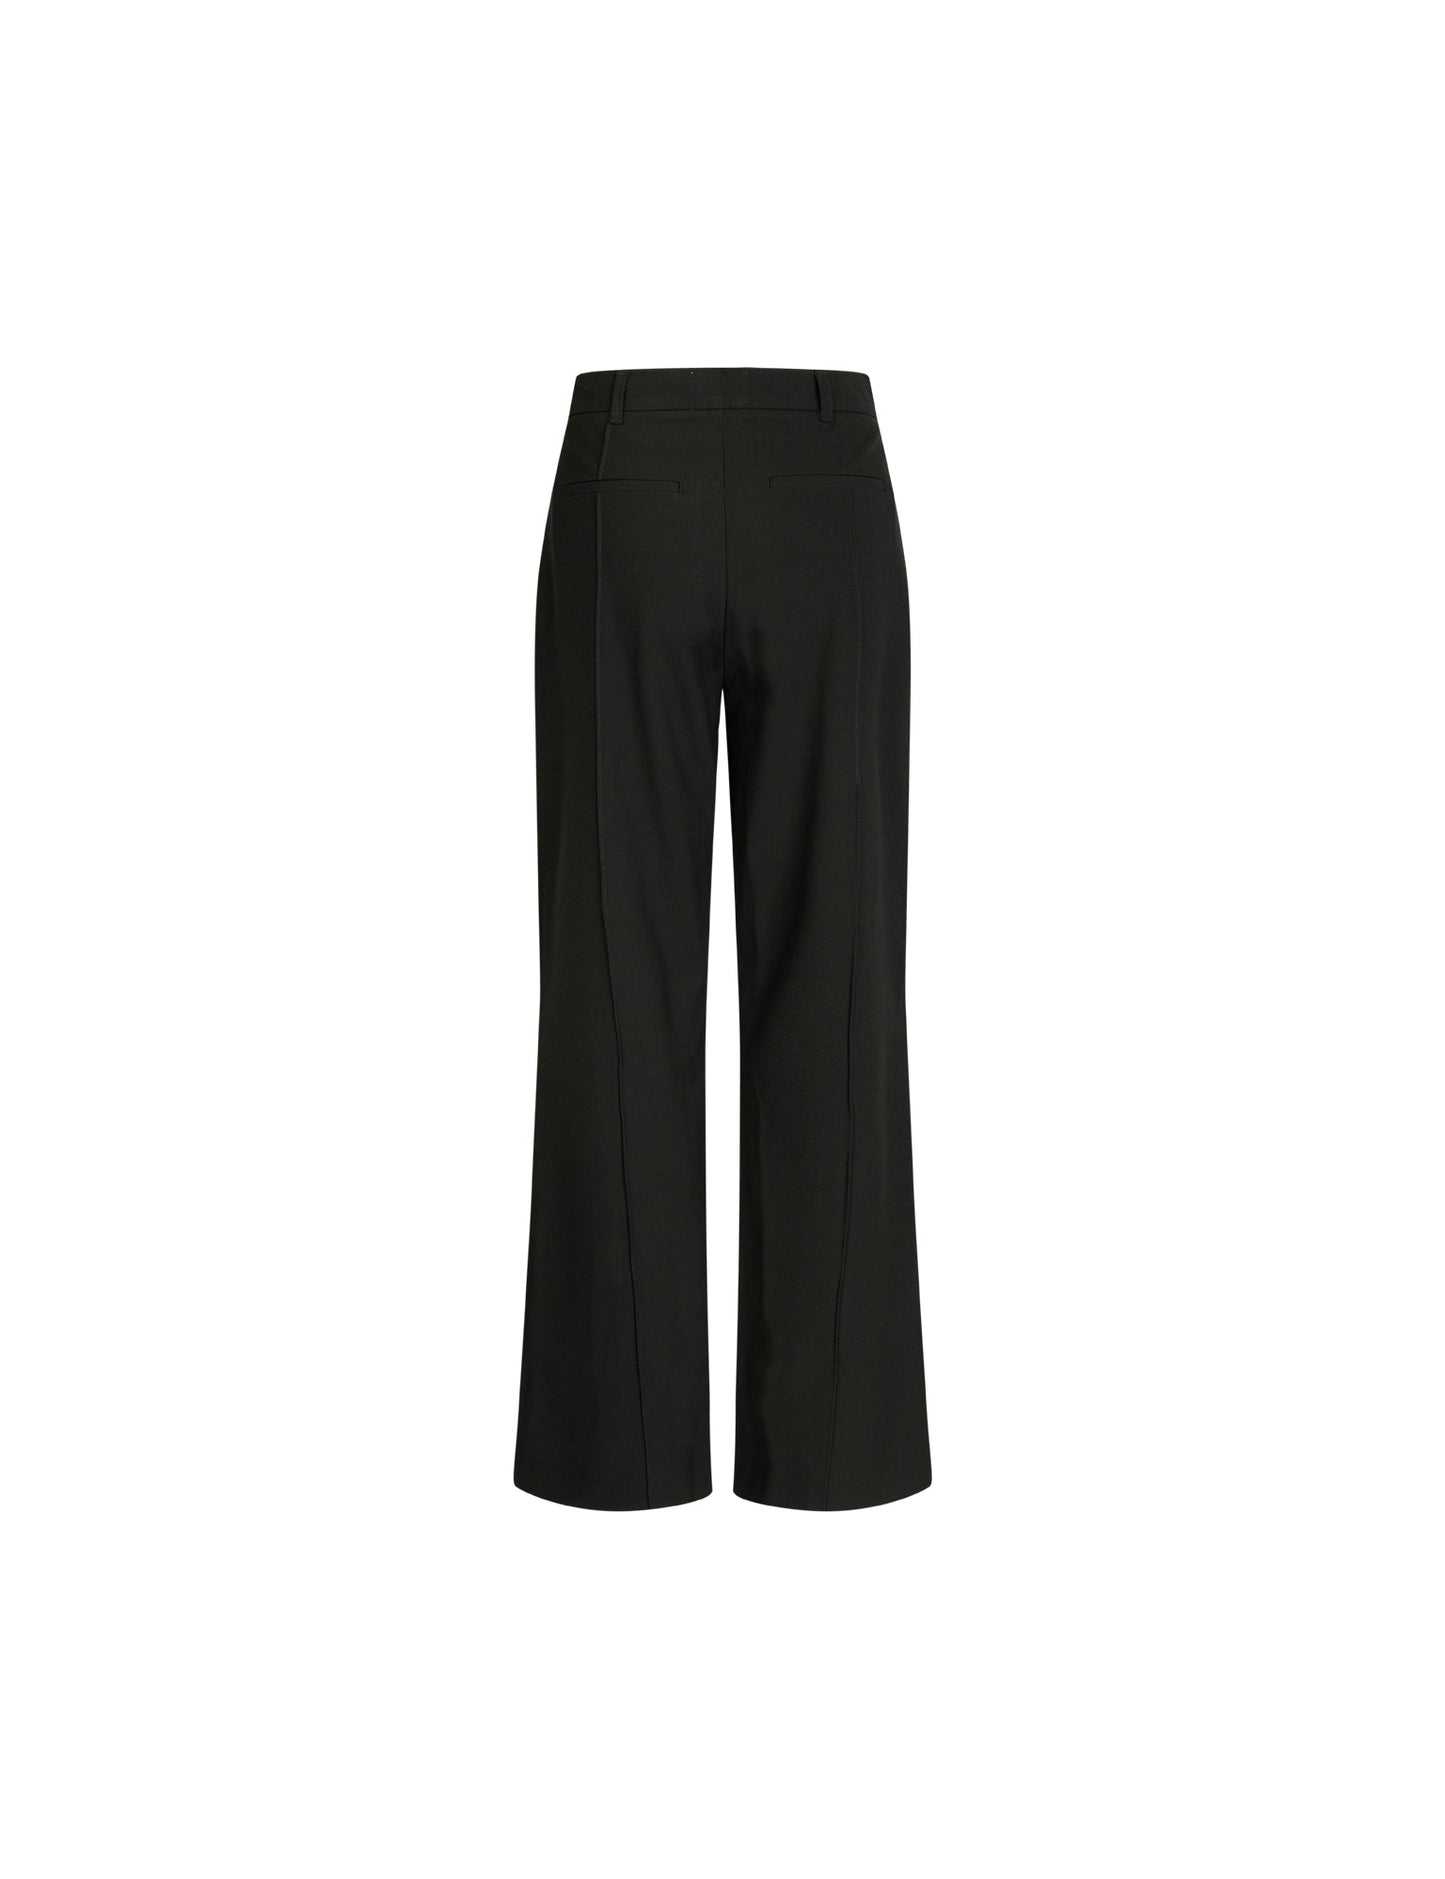 Recycled Sportina Perry Pants, Black